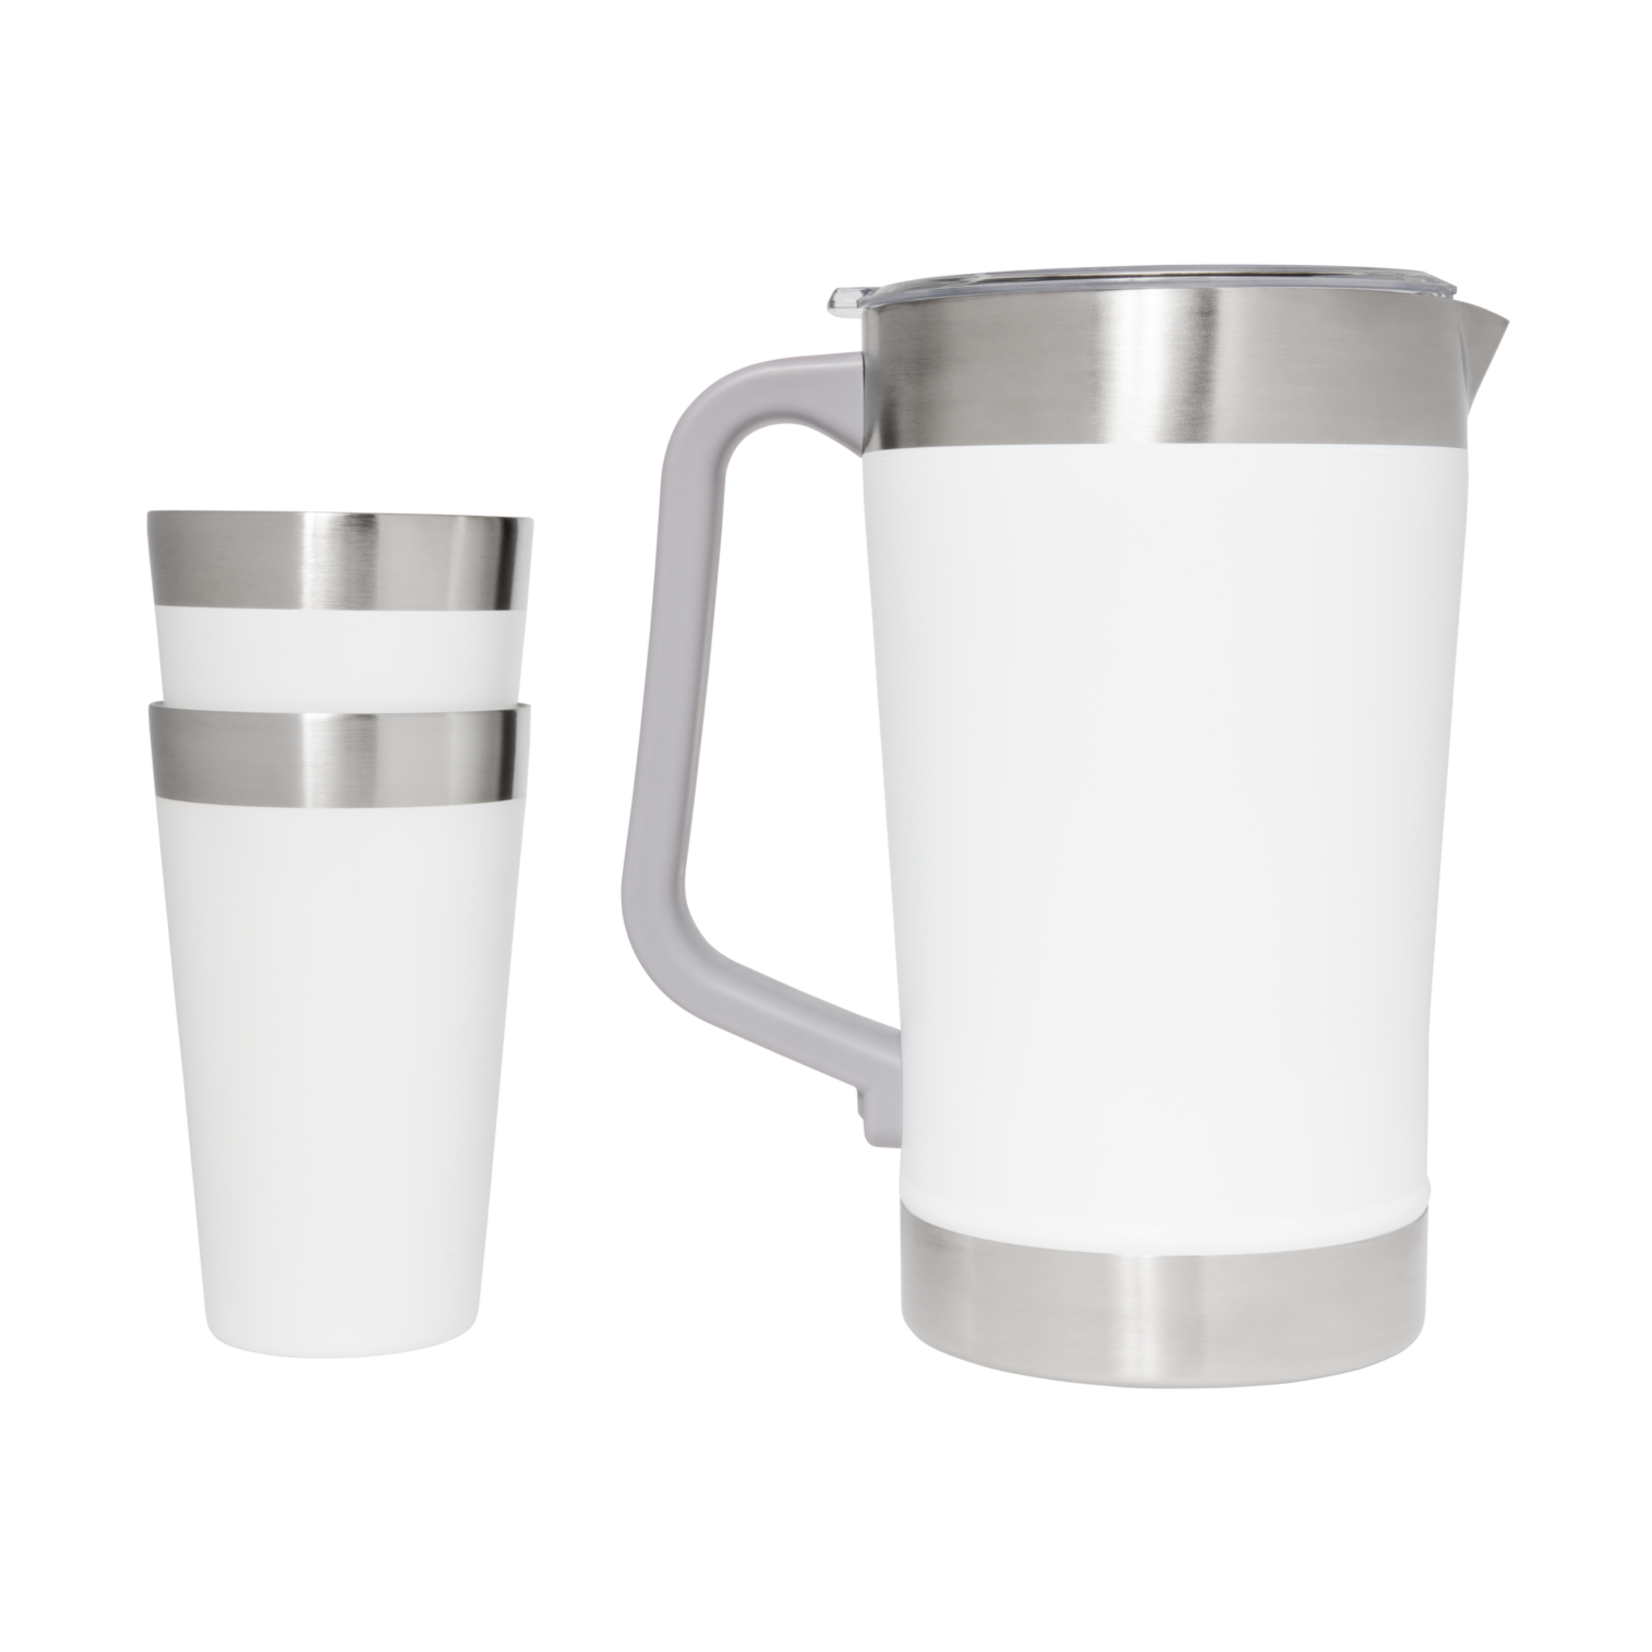 Stanley The Stay-Chill Classic Pitcher Set Polar 64oz